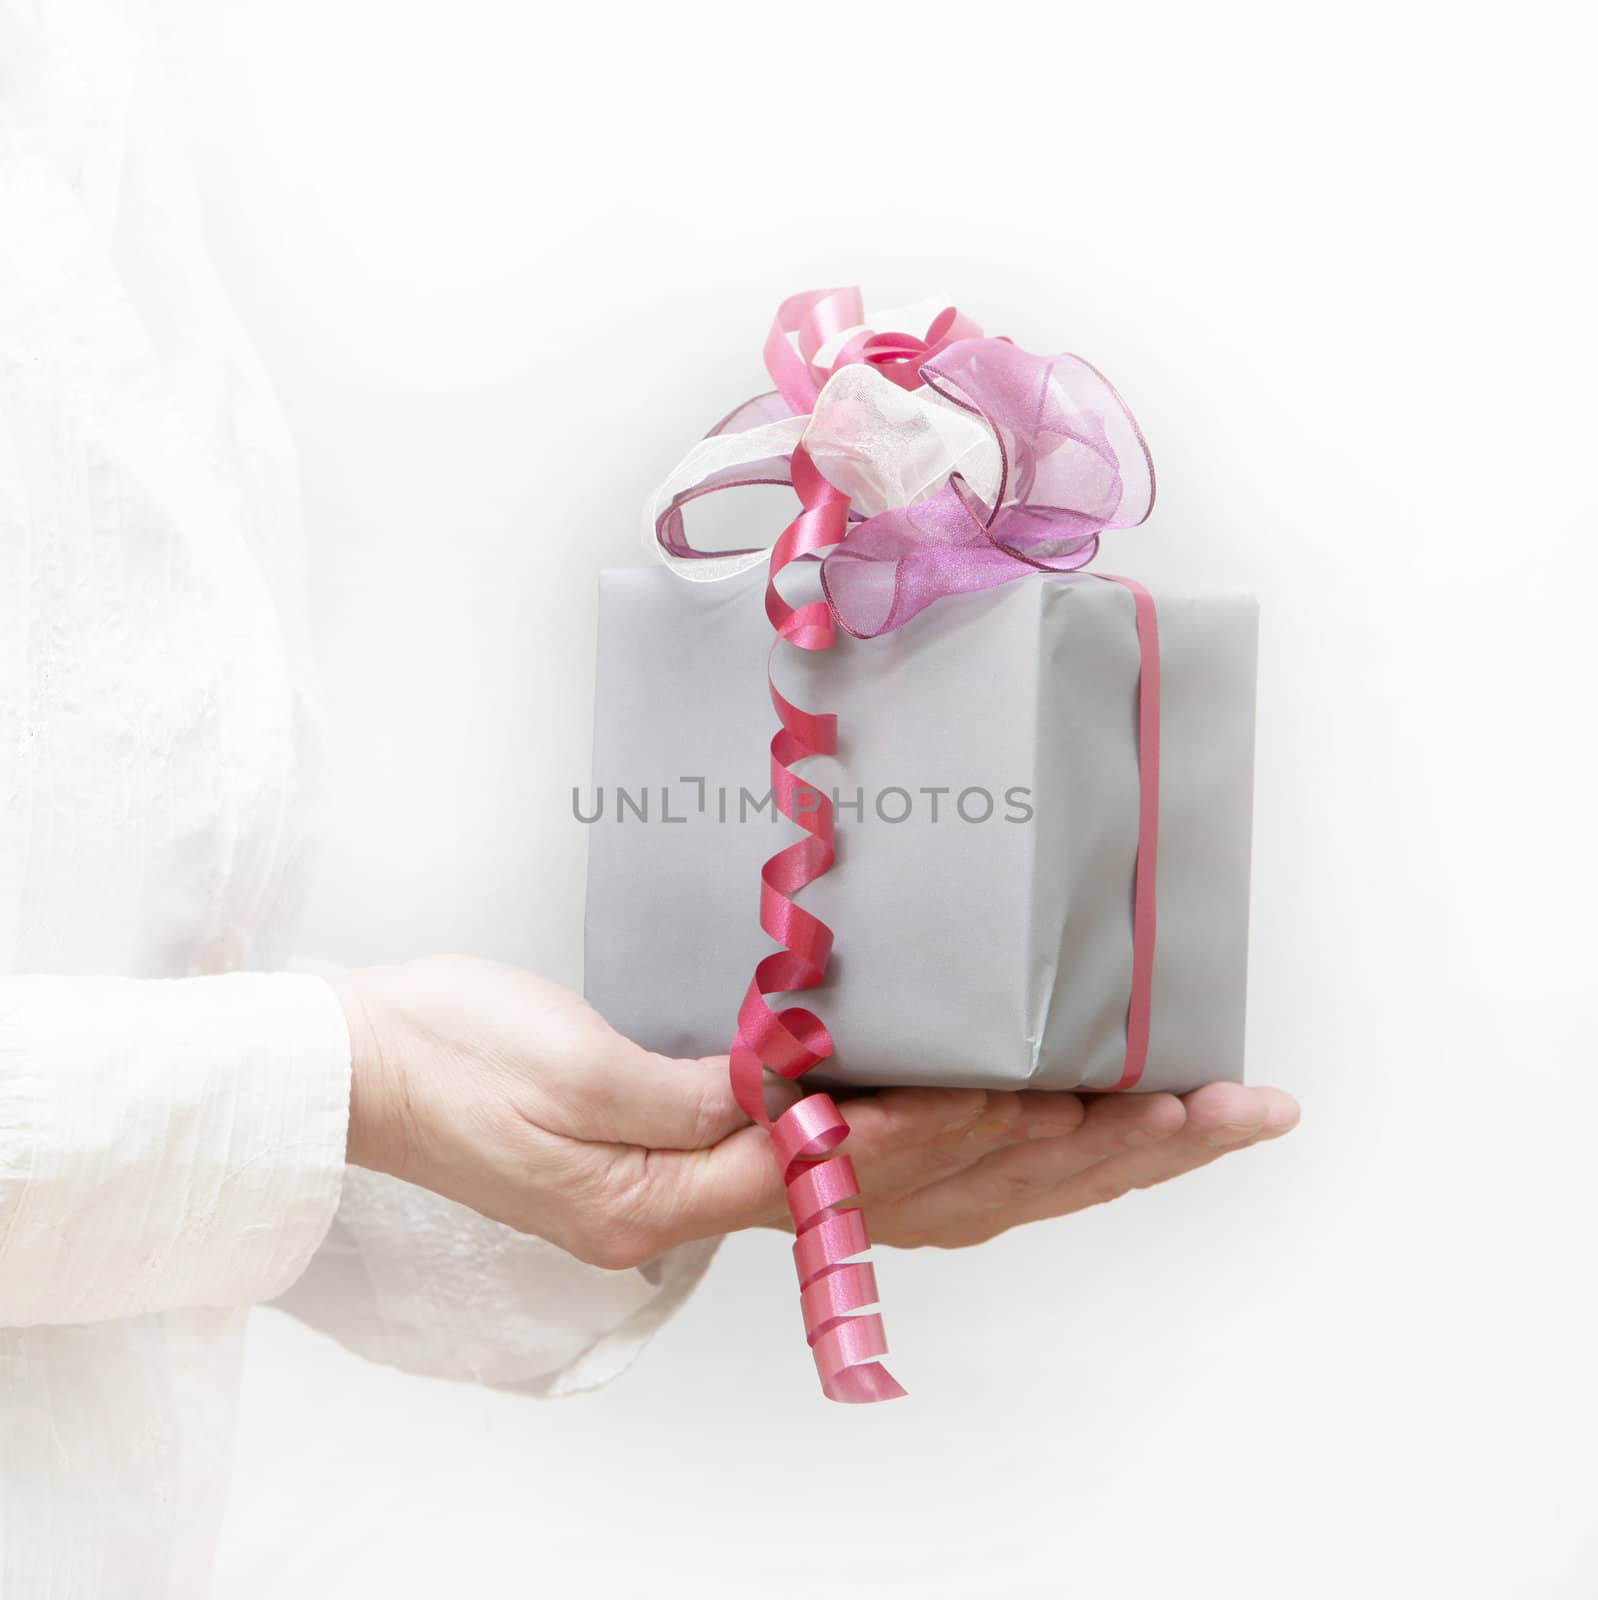 Woman presented with a gift ribbon - white background
